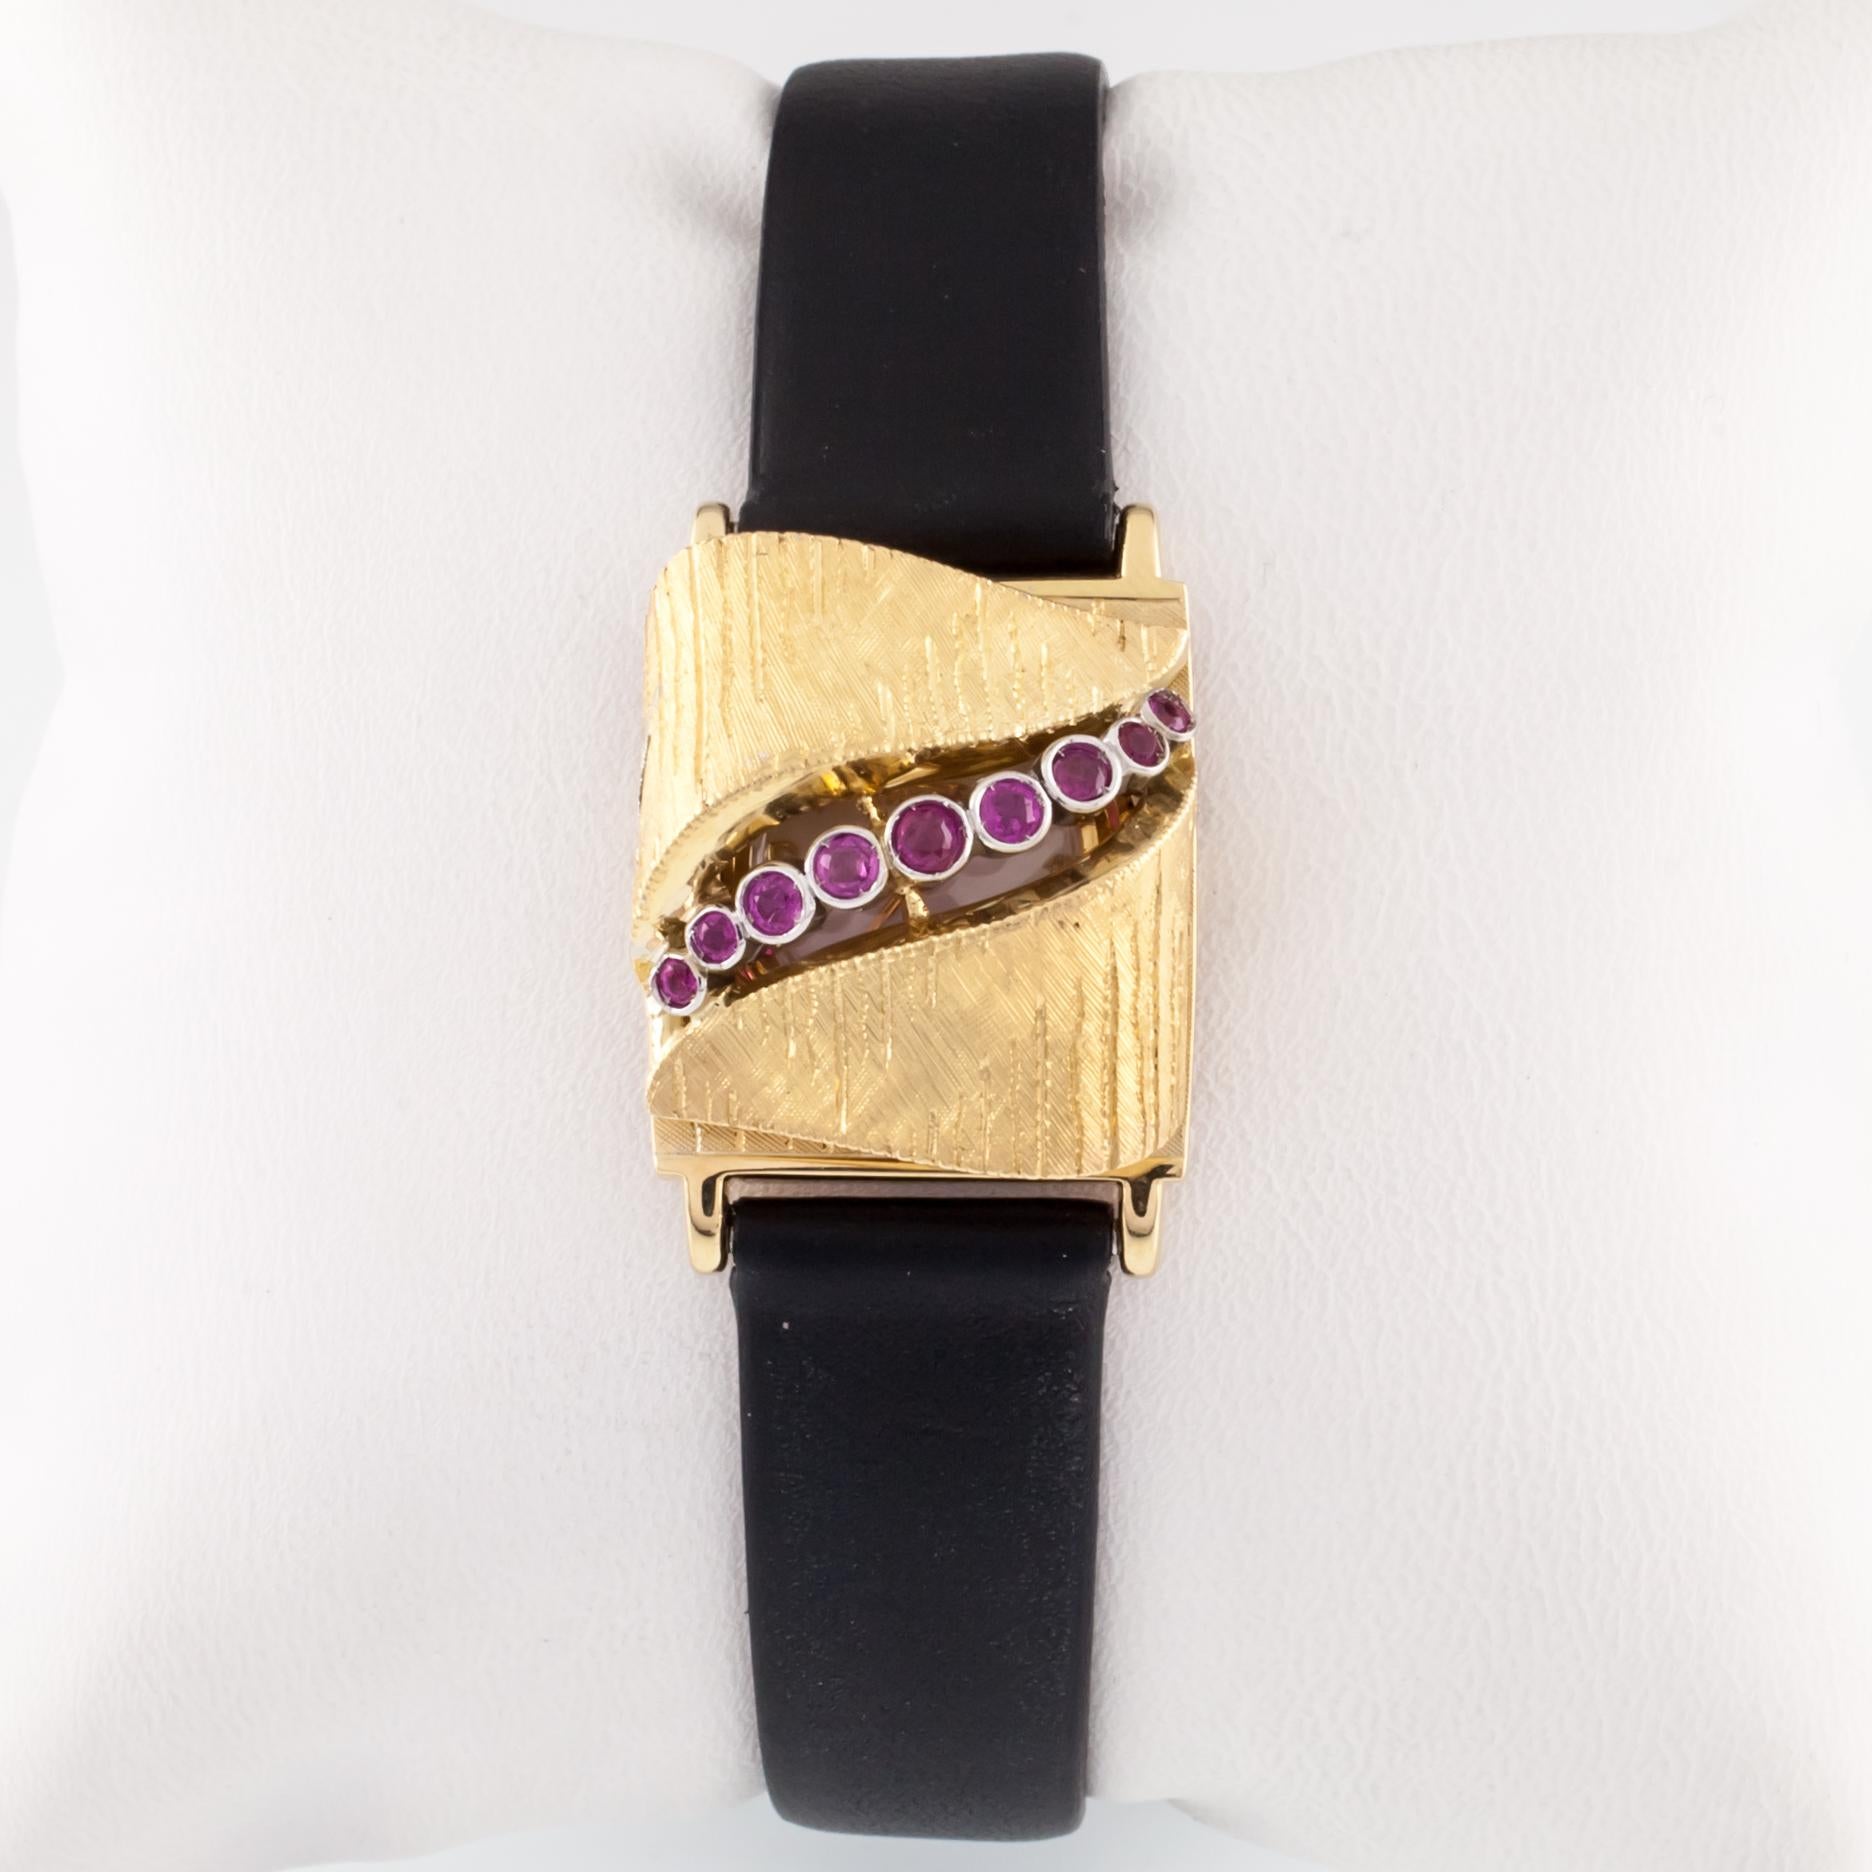 Tissot Vintage 18k Yellow Gold Ladies Dress Watch w/ Ornate Tourmaline Cover

Movement #129E5011905

18k Yellow Gold Case

Features 18k Yellow Gold Miniature Watch Case Set in Gold Frame w/ Hinge and Accented by Gold & Tourmaline Cover

Cover